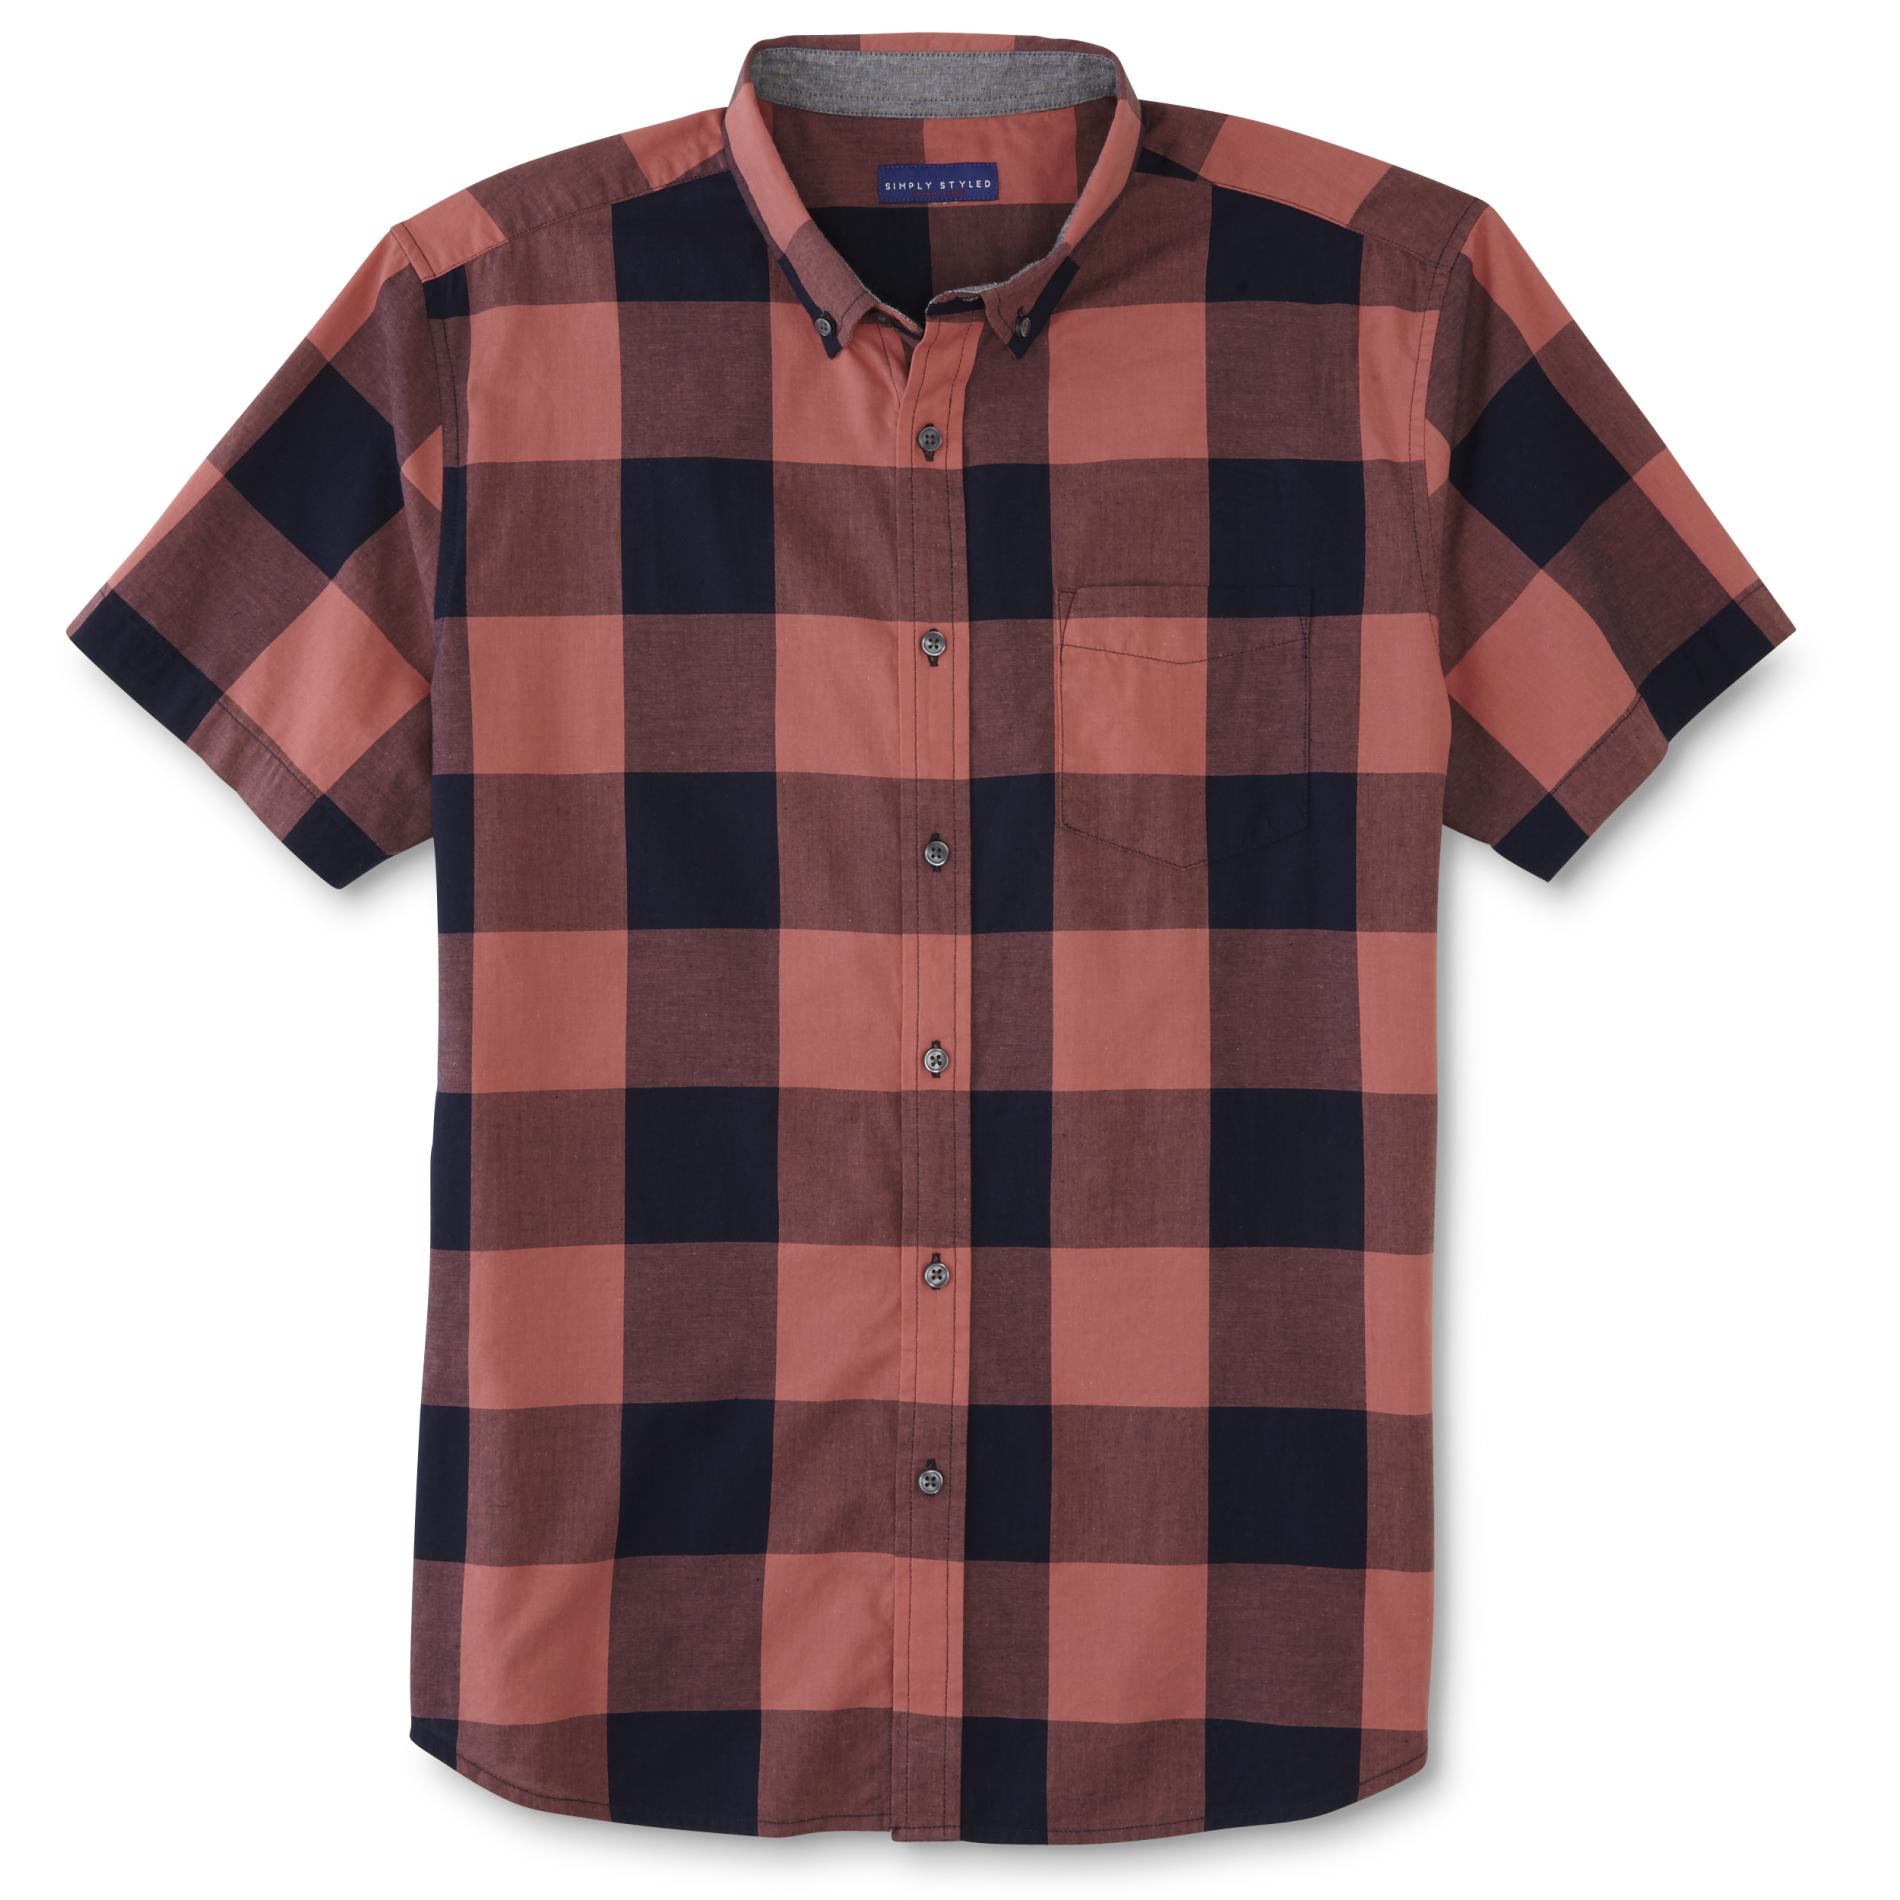 Simply Styled Men's Short-Sleeve Button-Front Shirt - Gingham